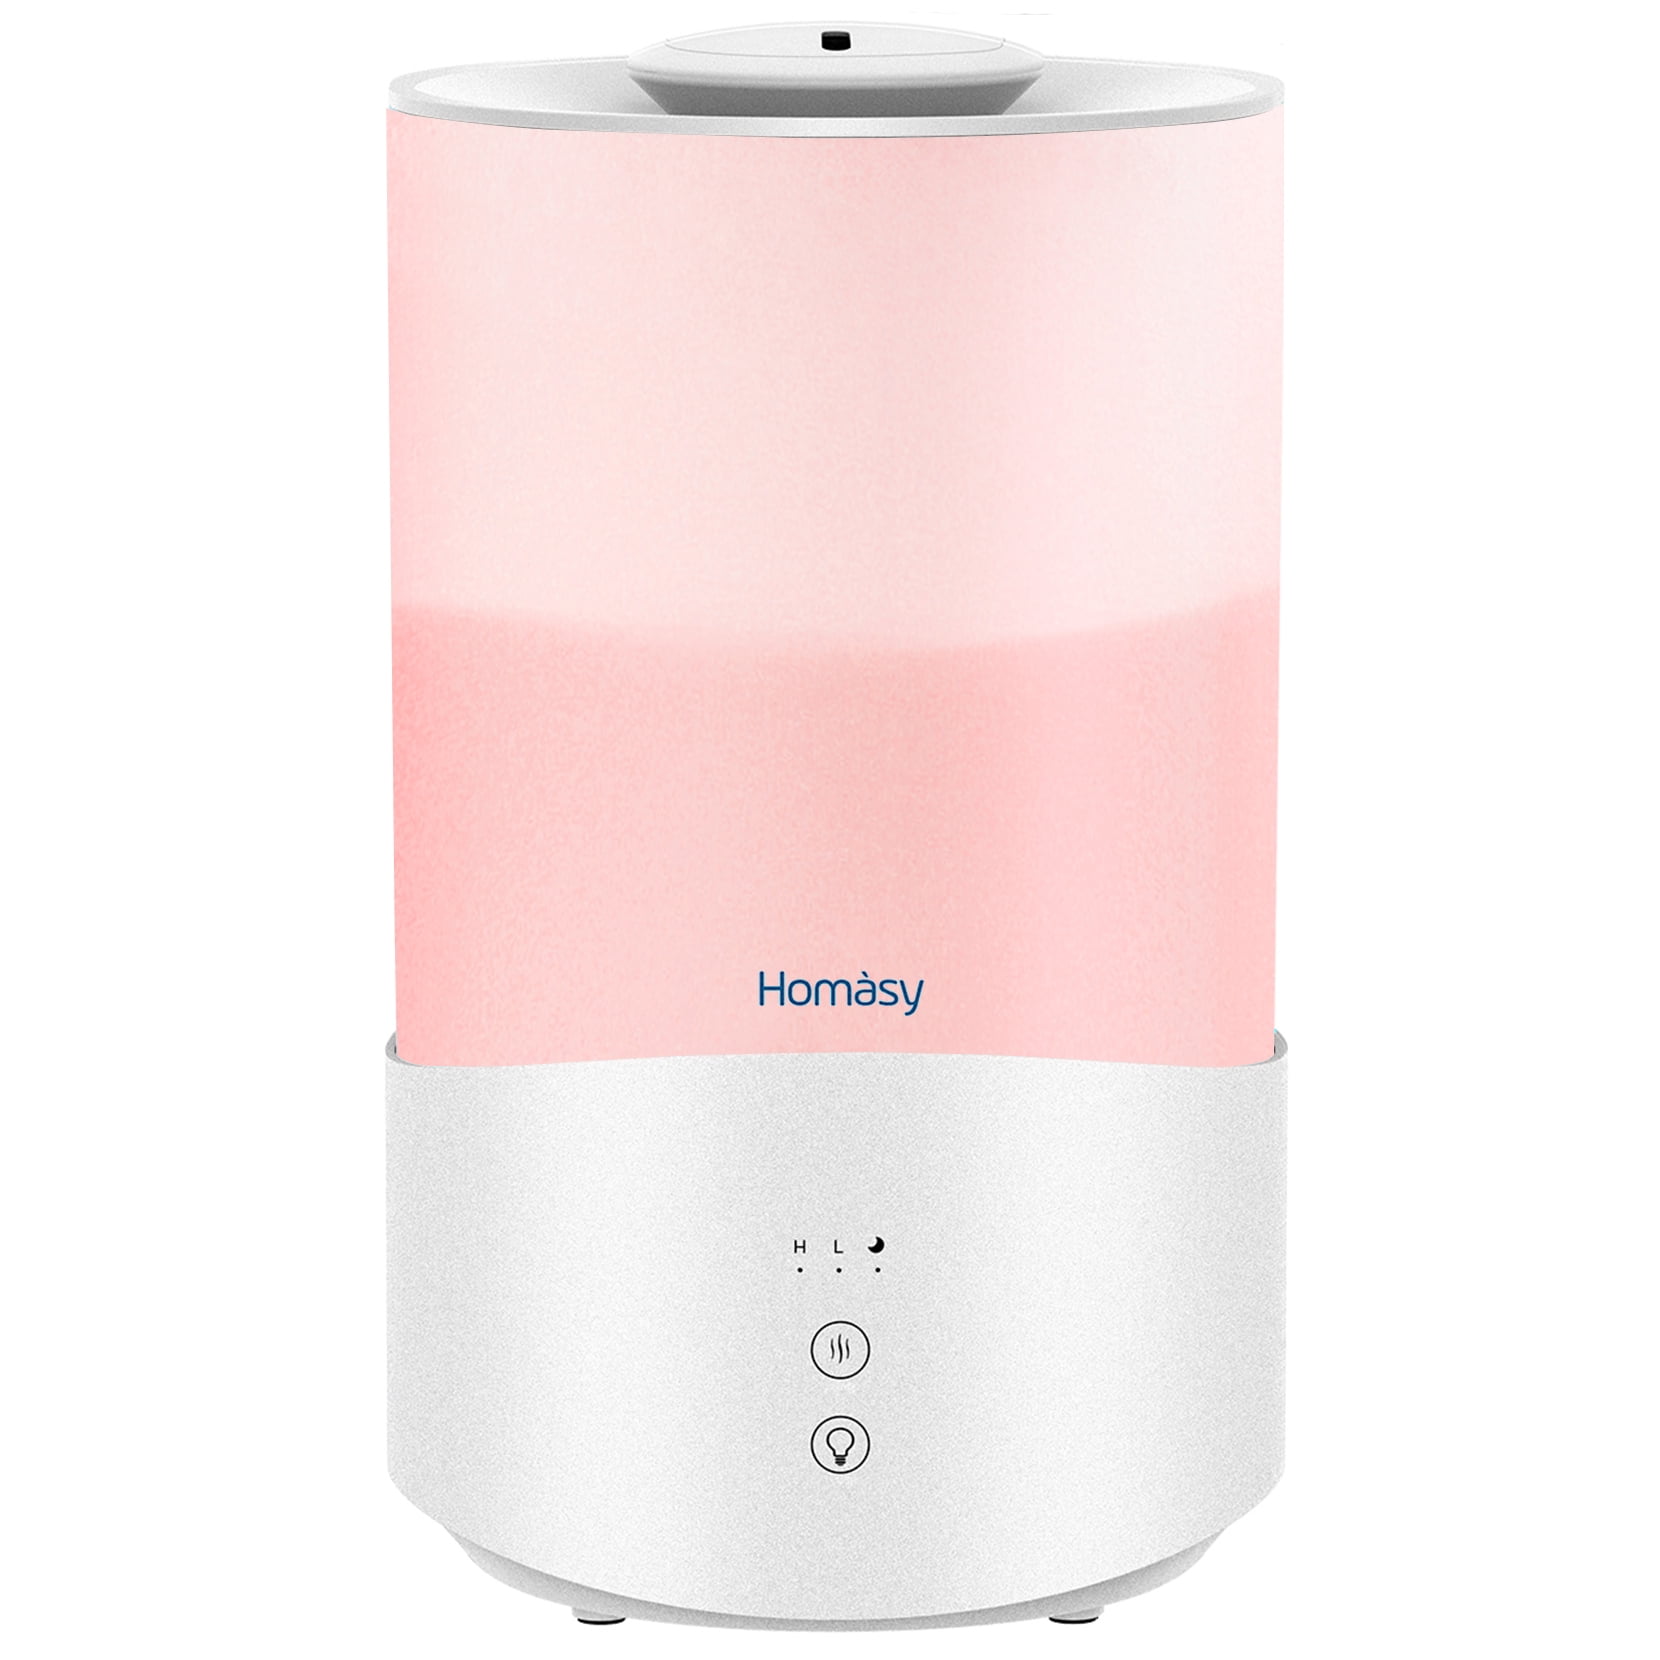 Dreamzy Humidifier for Bedroom Room Streaming Light Desktop Air 500ml Cool  Mist